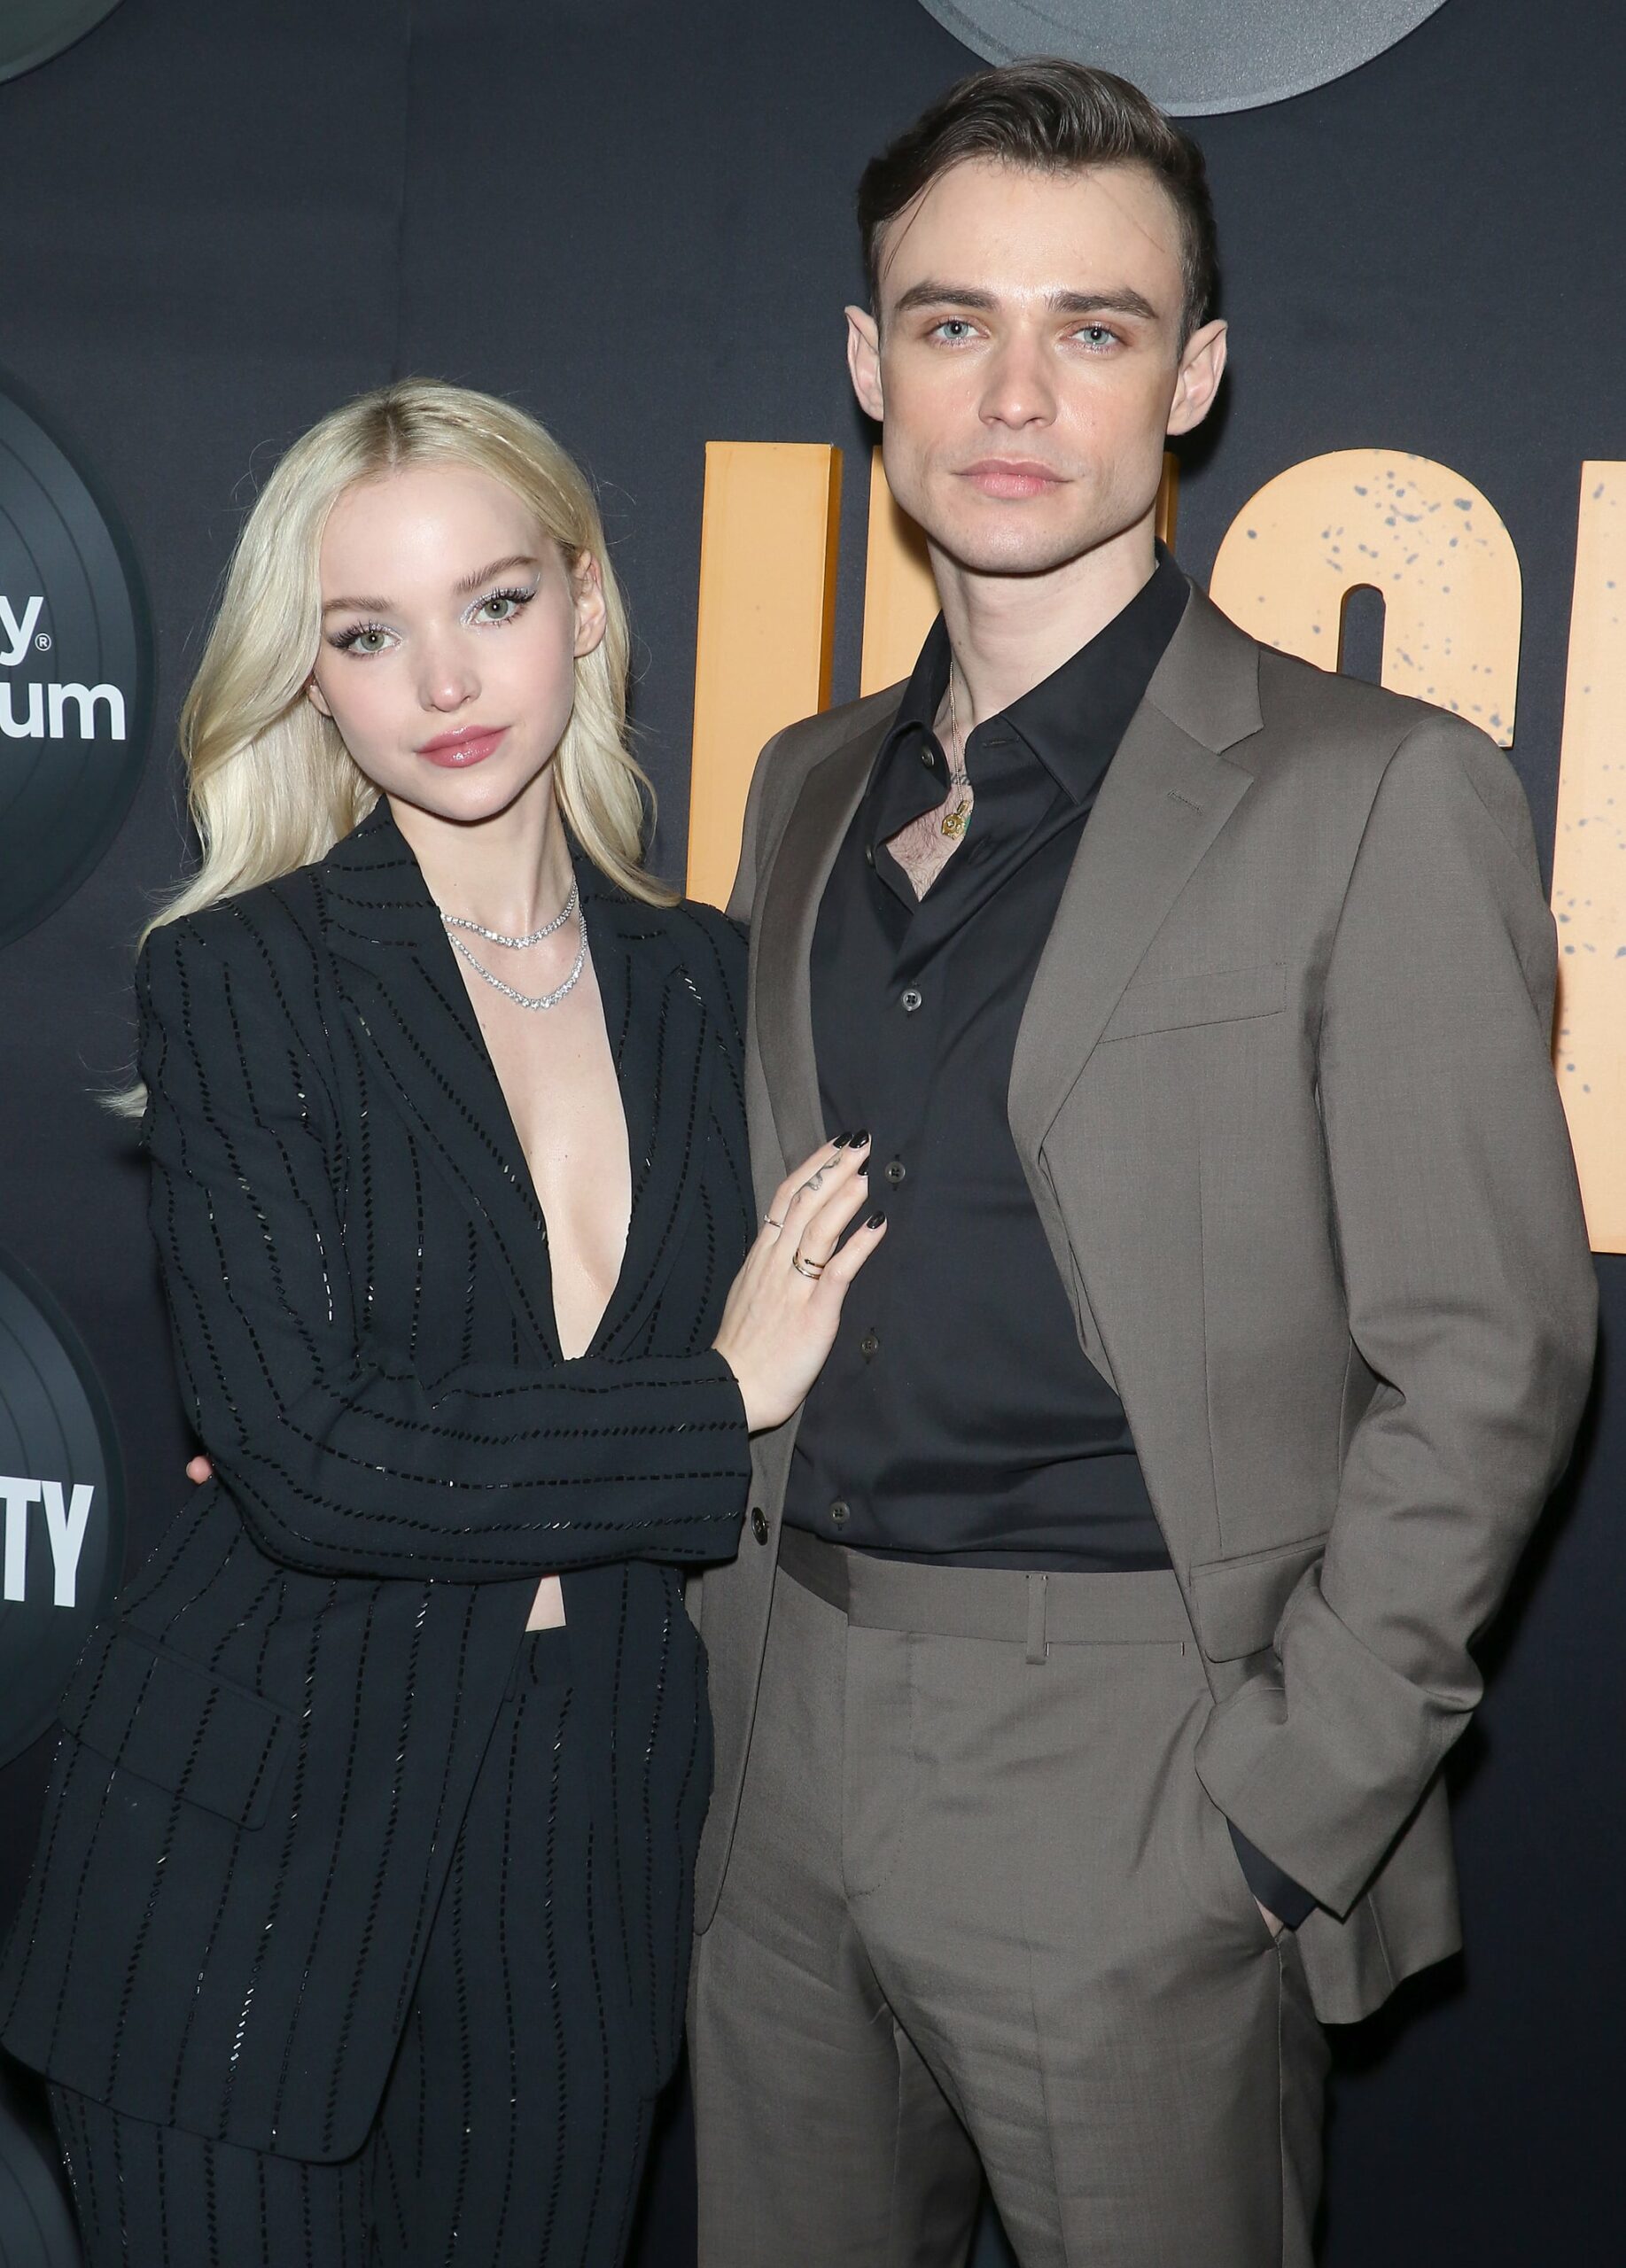 NEW YORK, NEW YORK - FEBRUARY 13: Dove Cameron and Thomas Doherty attend the Hulu